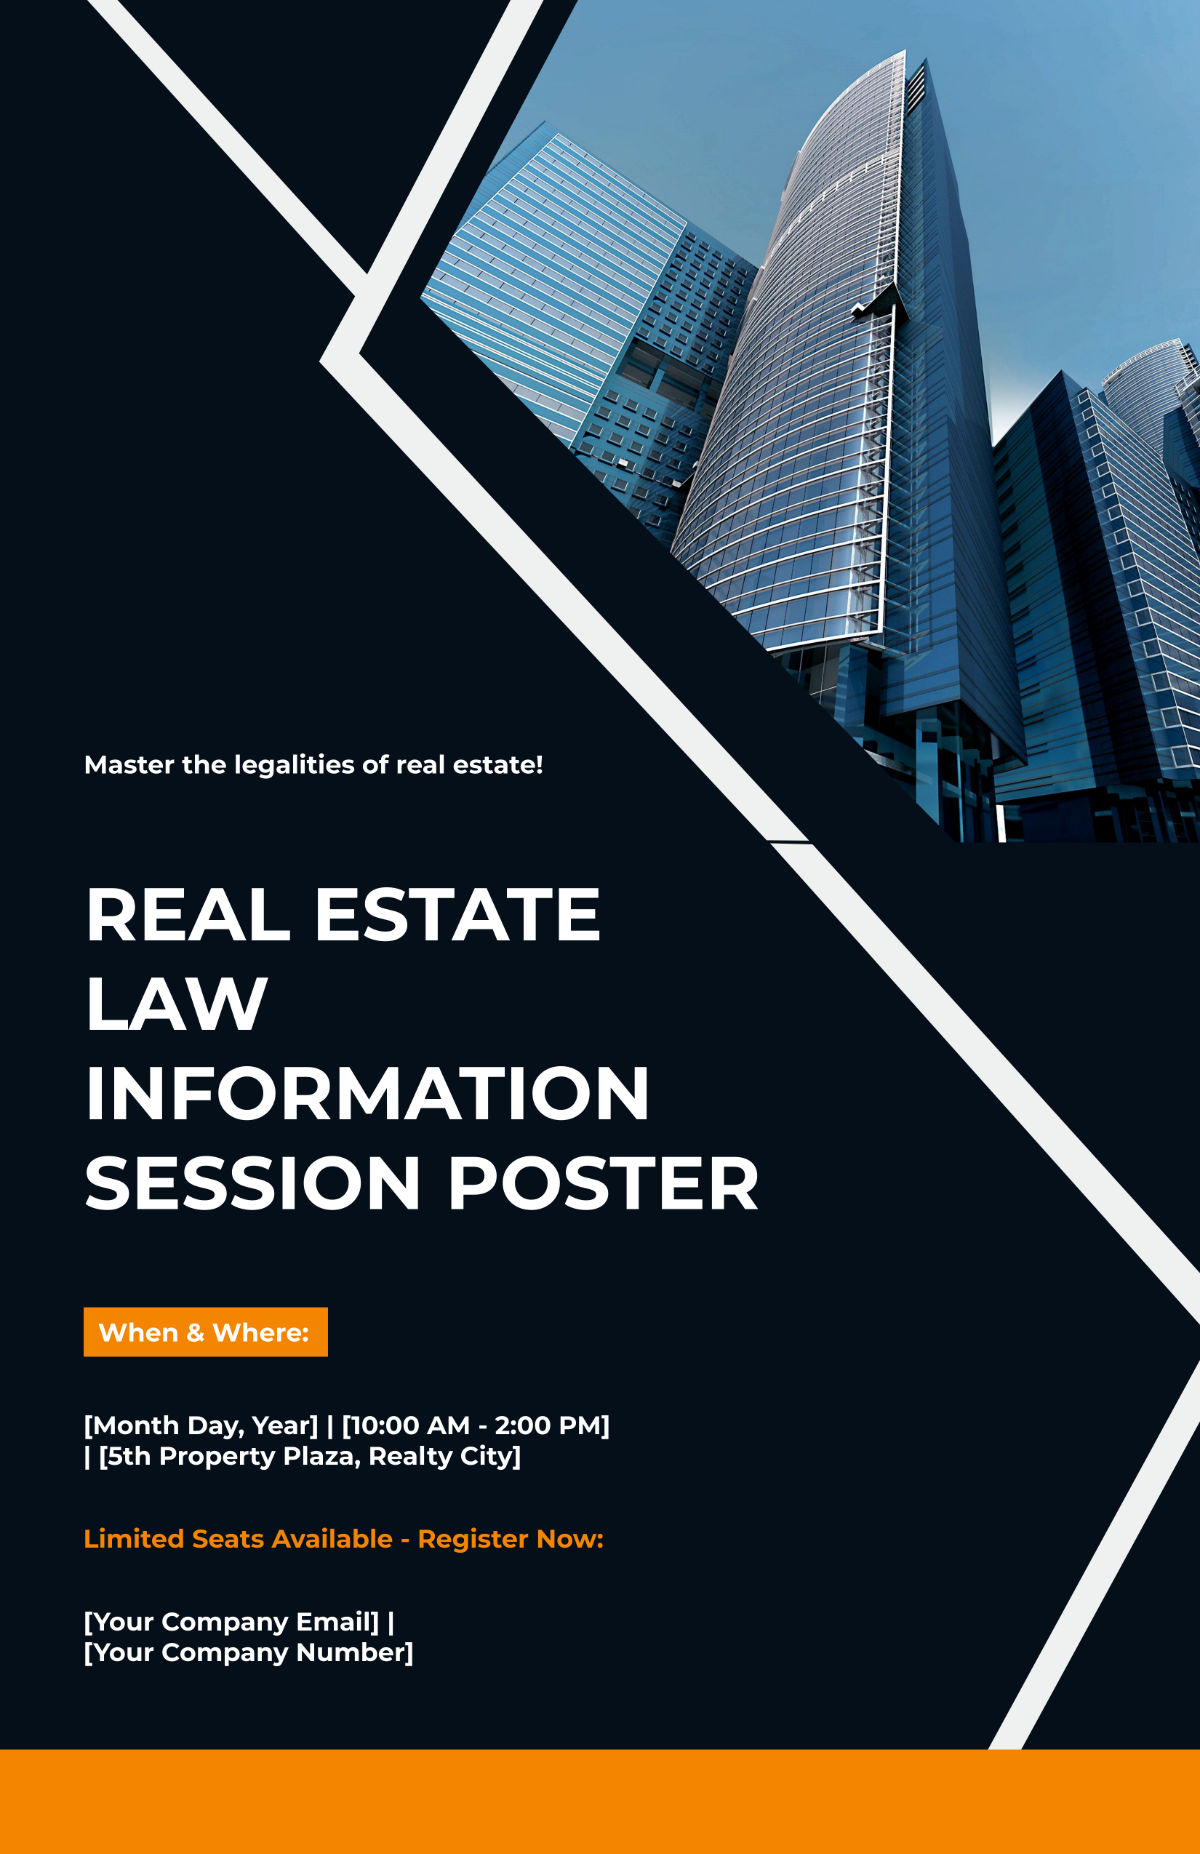 Real Estate Law Information Session Poster